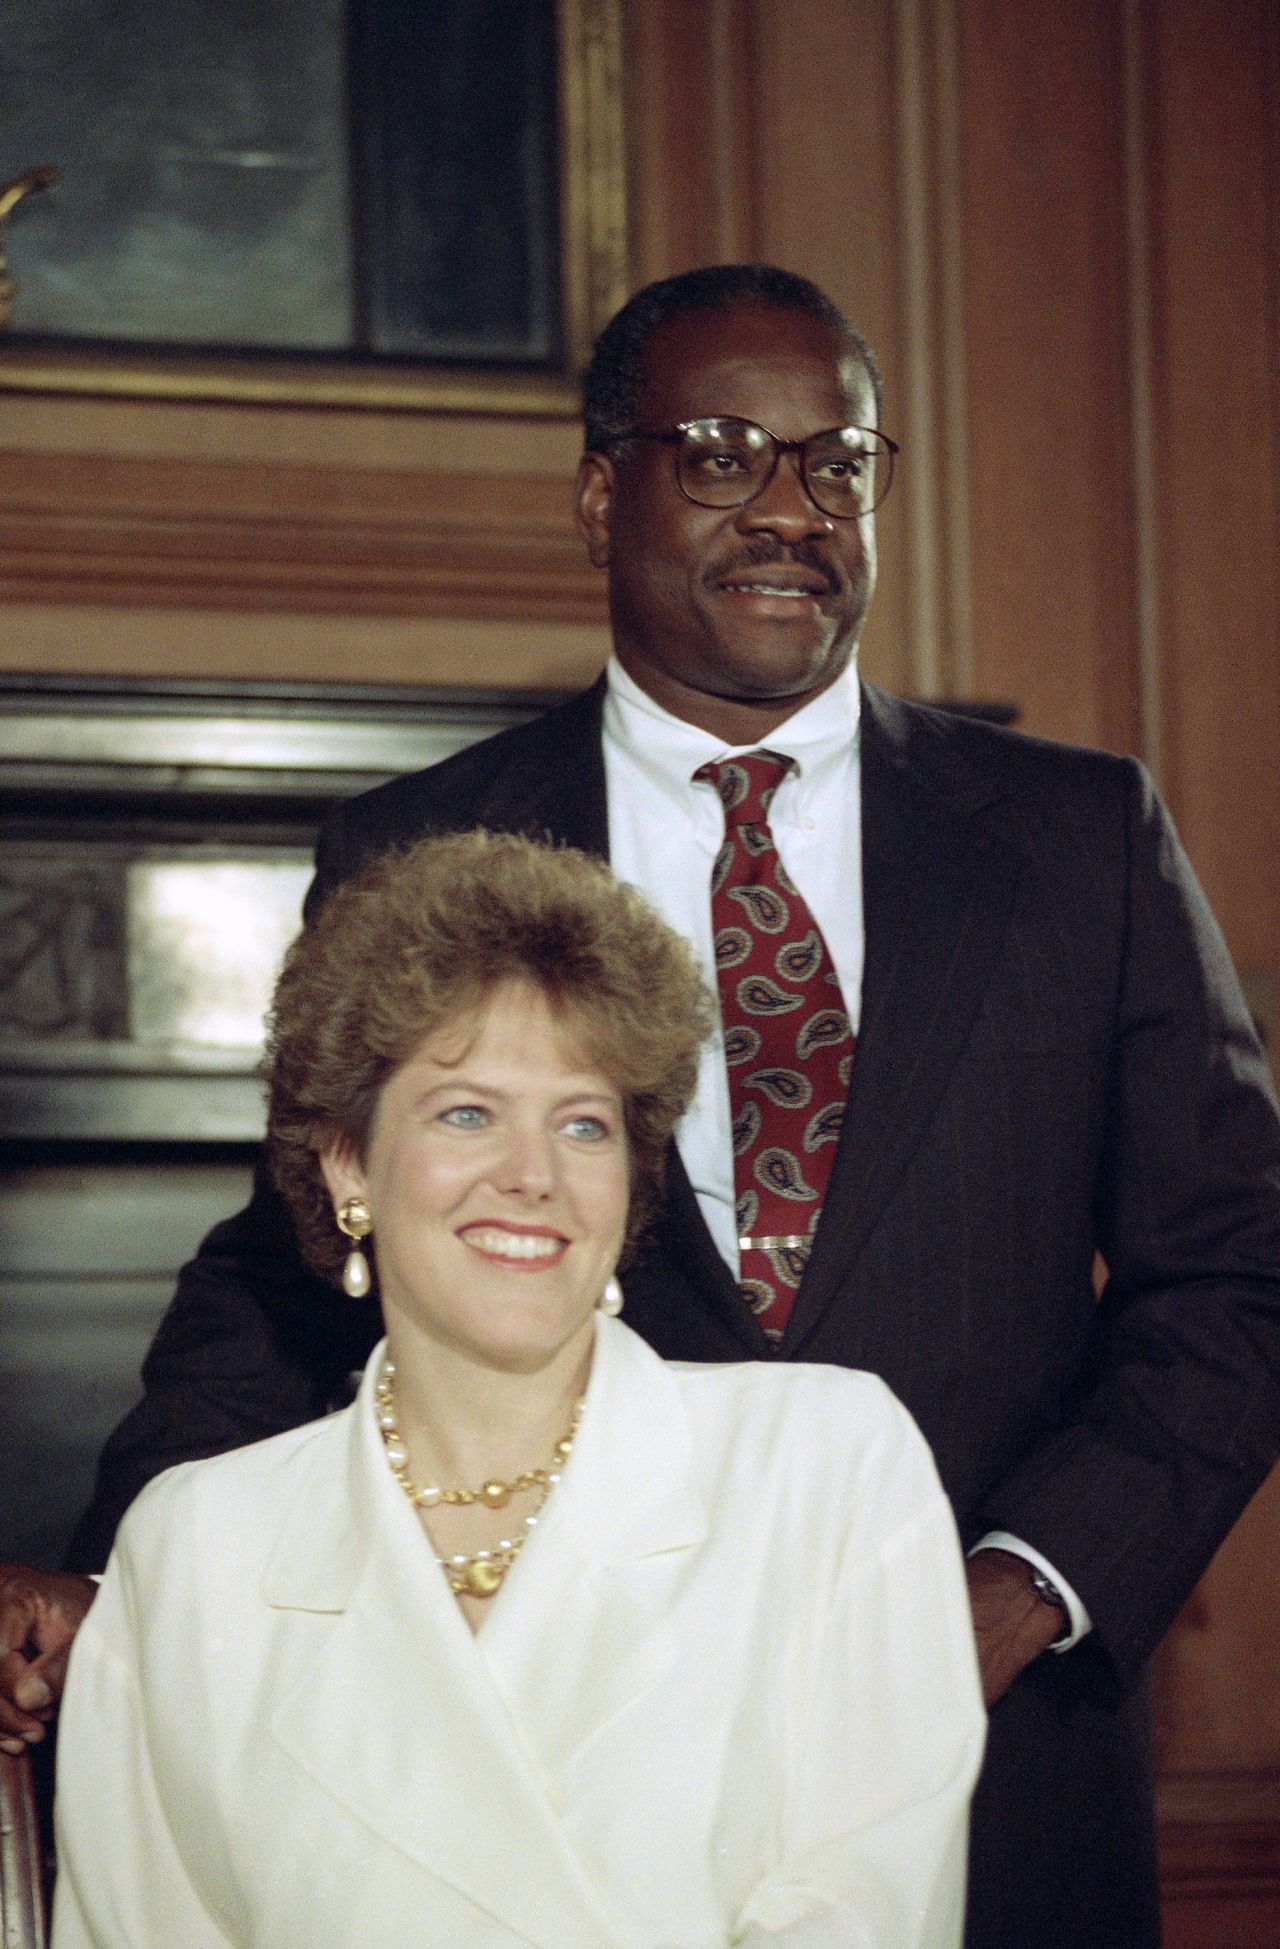 Thomas and his wife, Virginia, in 1991. The two married in 1987. Thomas had been married once before.